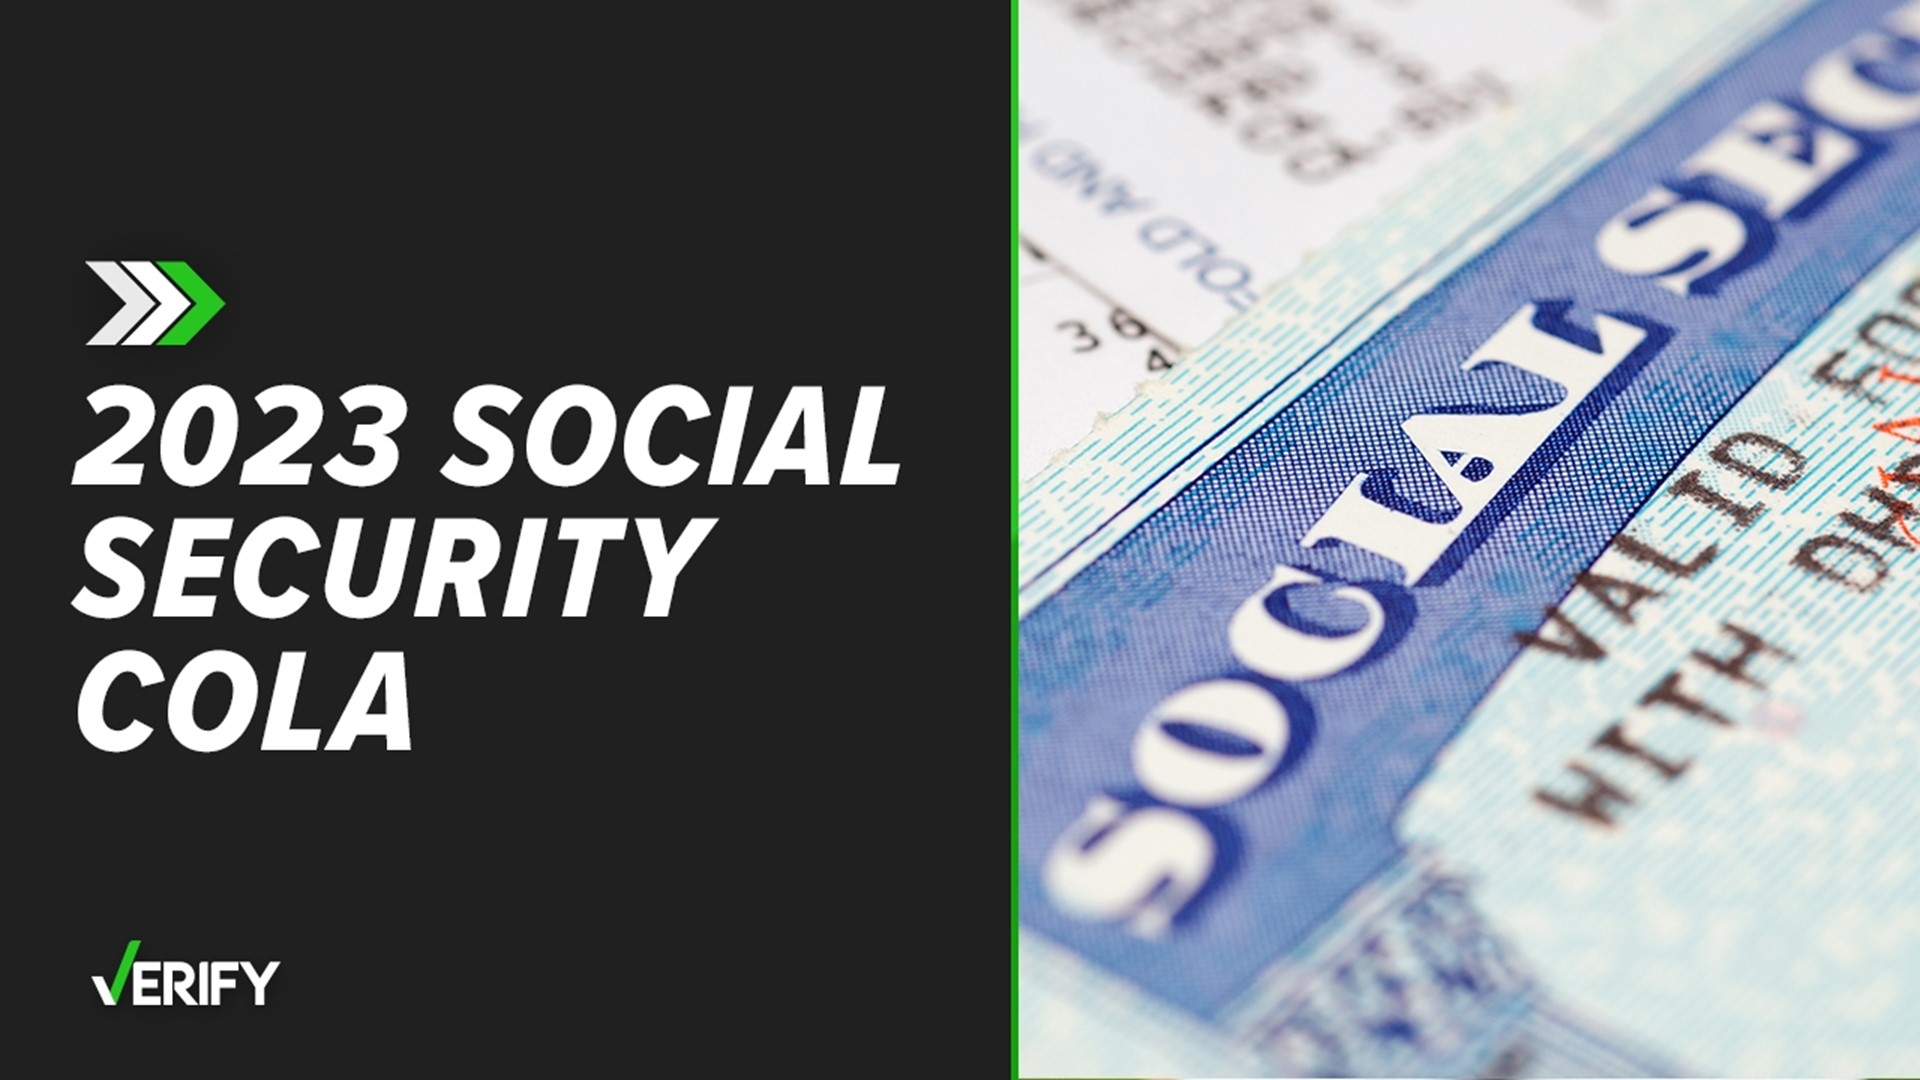 Social Security announced that the 2023 cost-of-living adjustment (COLA) is 8.7%, meaning benefit payments will increase by this amount come January.